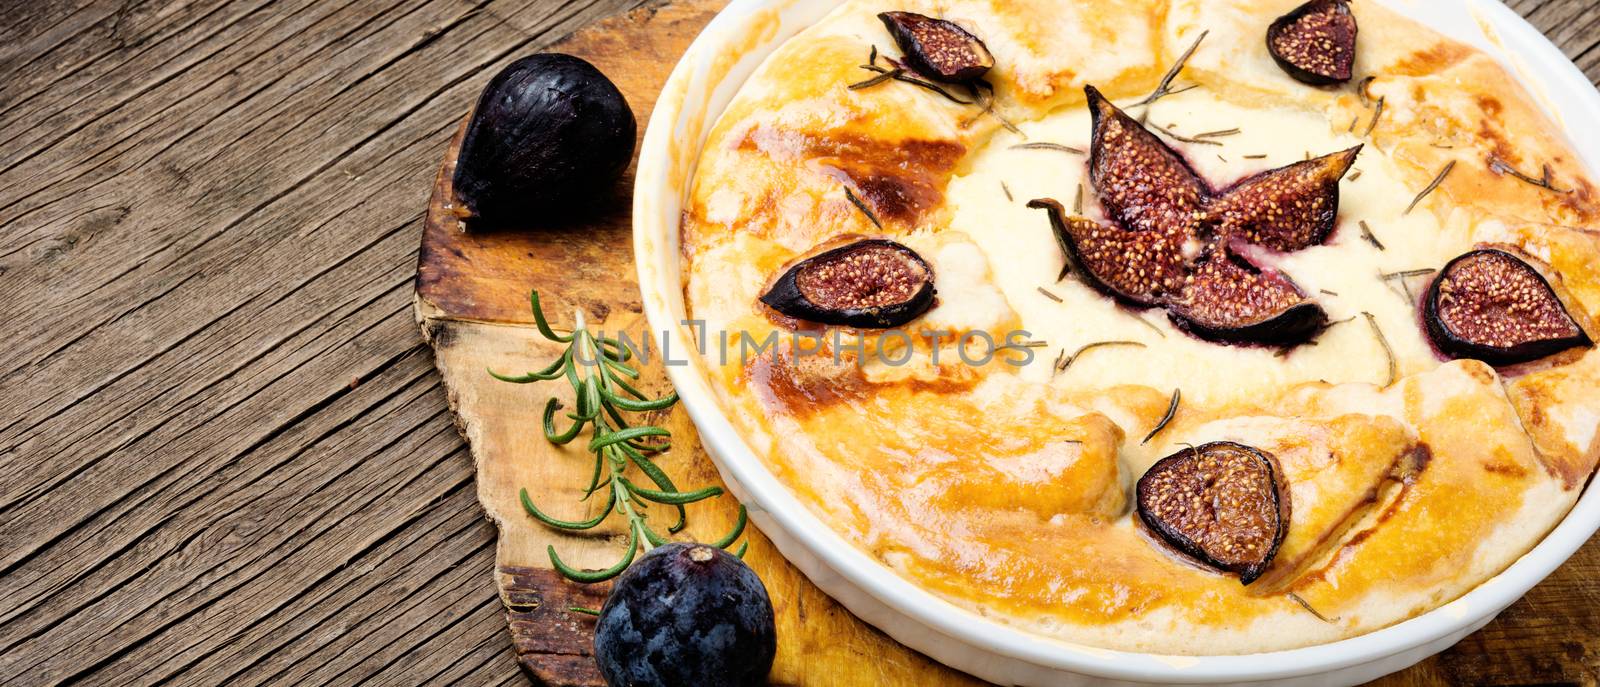 Autumn cake, Italian focaccia with cottage cheese, figs and rosemary